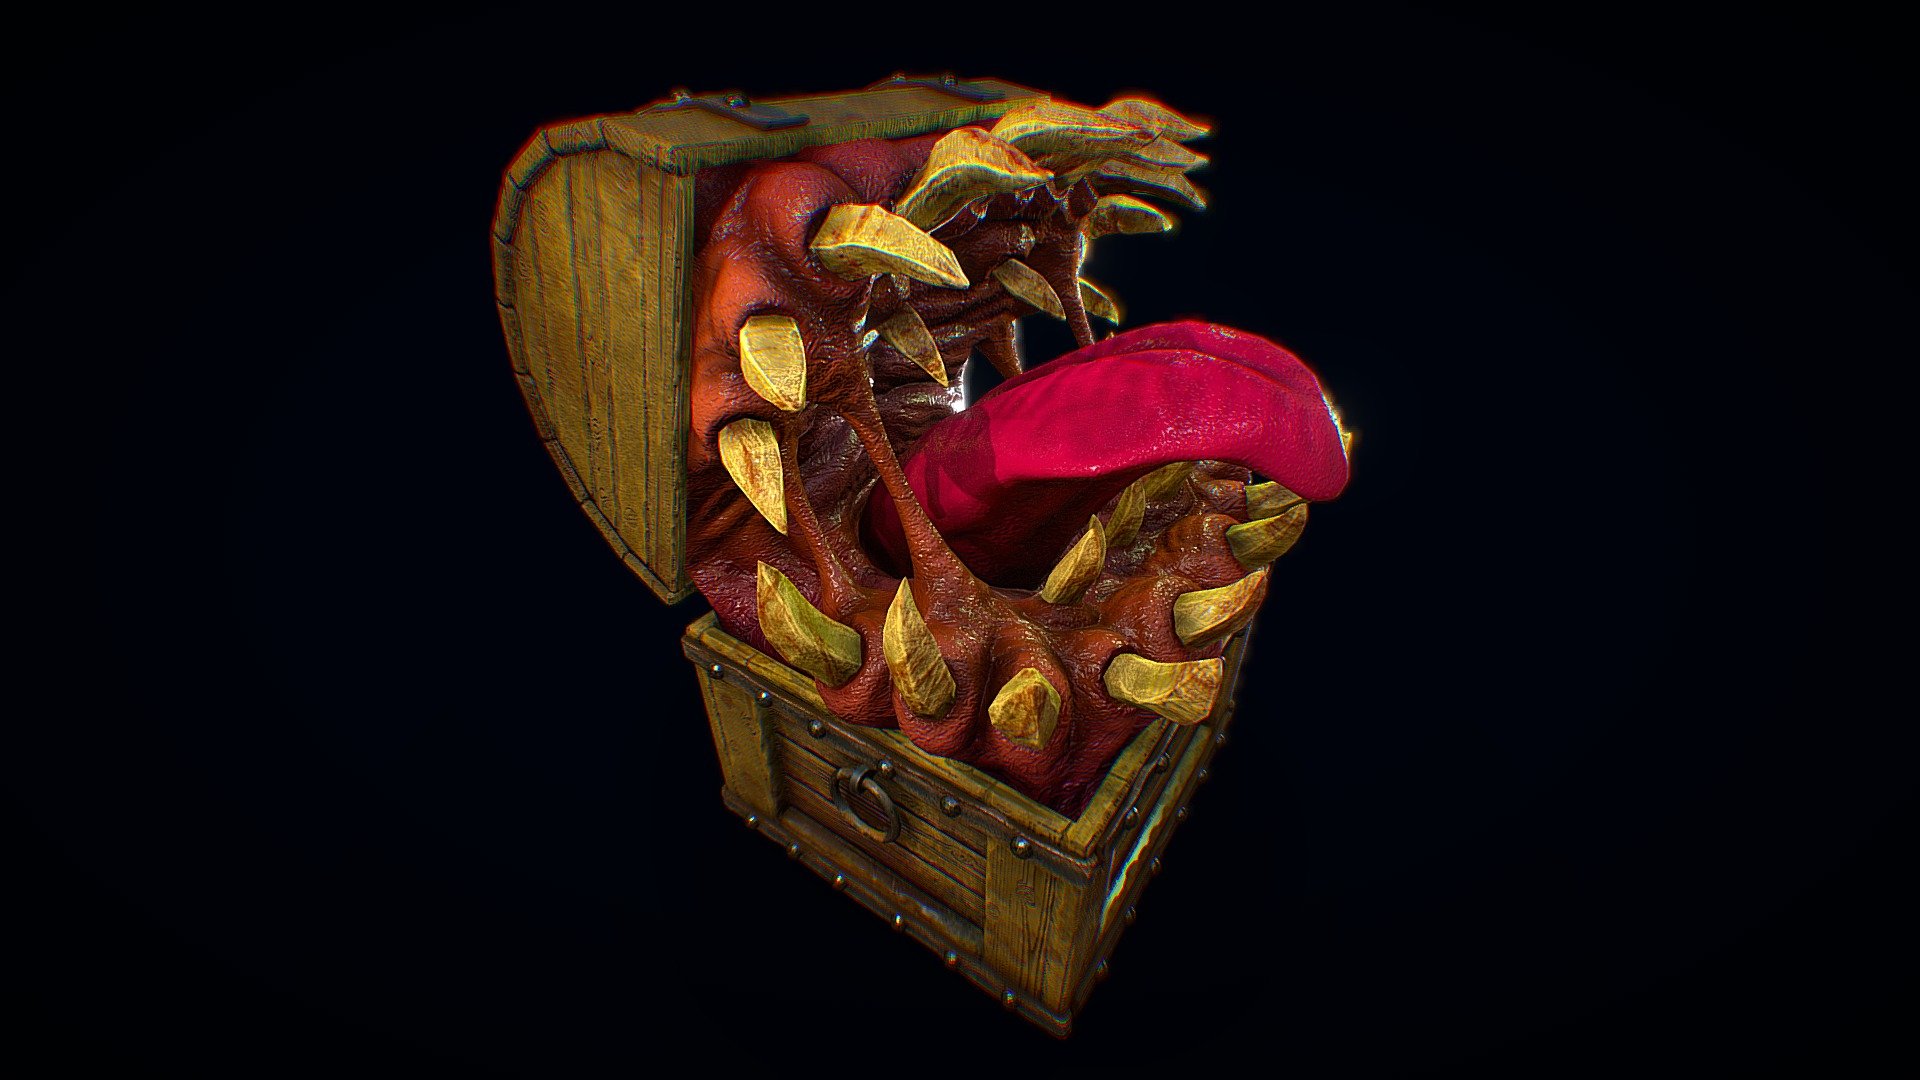 Low-poly 3D model of Mimic Chest, this model has 2K textures. I made this model inspired by Mimic chests from &ldquo;Terraria